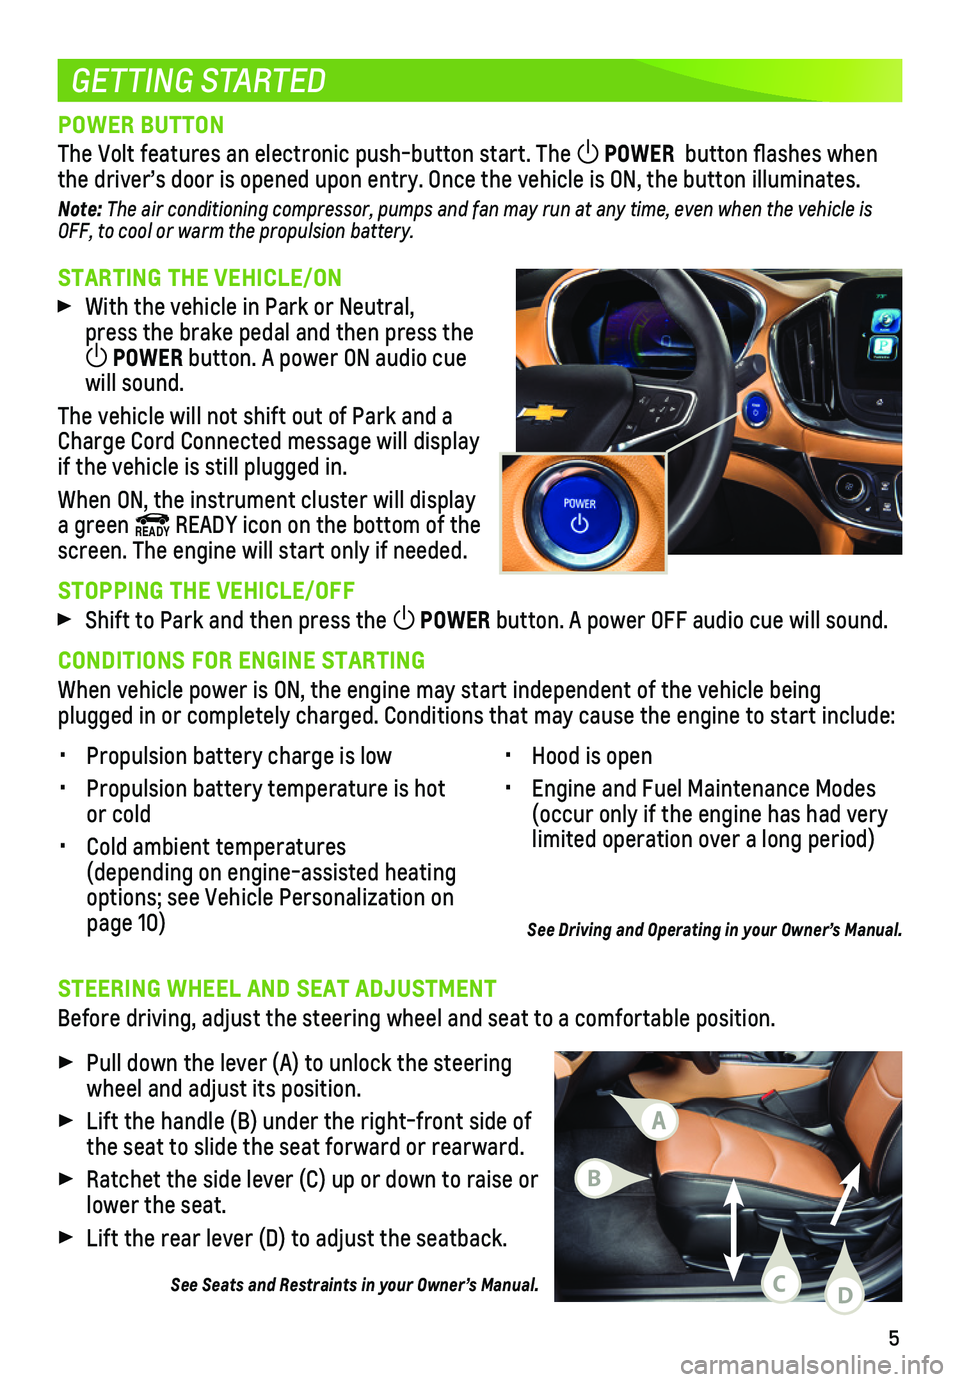 CHEVROLET VOLT 2018  Get To Know Guide 5
STARTING THE VEHICLE/ON
 With the vehicle in Park or Neutral, press the brake pedal and then press the POWER button. A power ON audio cue will sound.
The vehicle will not shift out of Park and a Ch